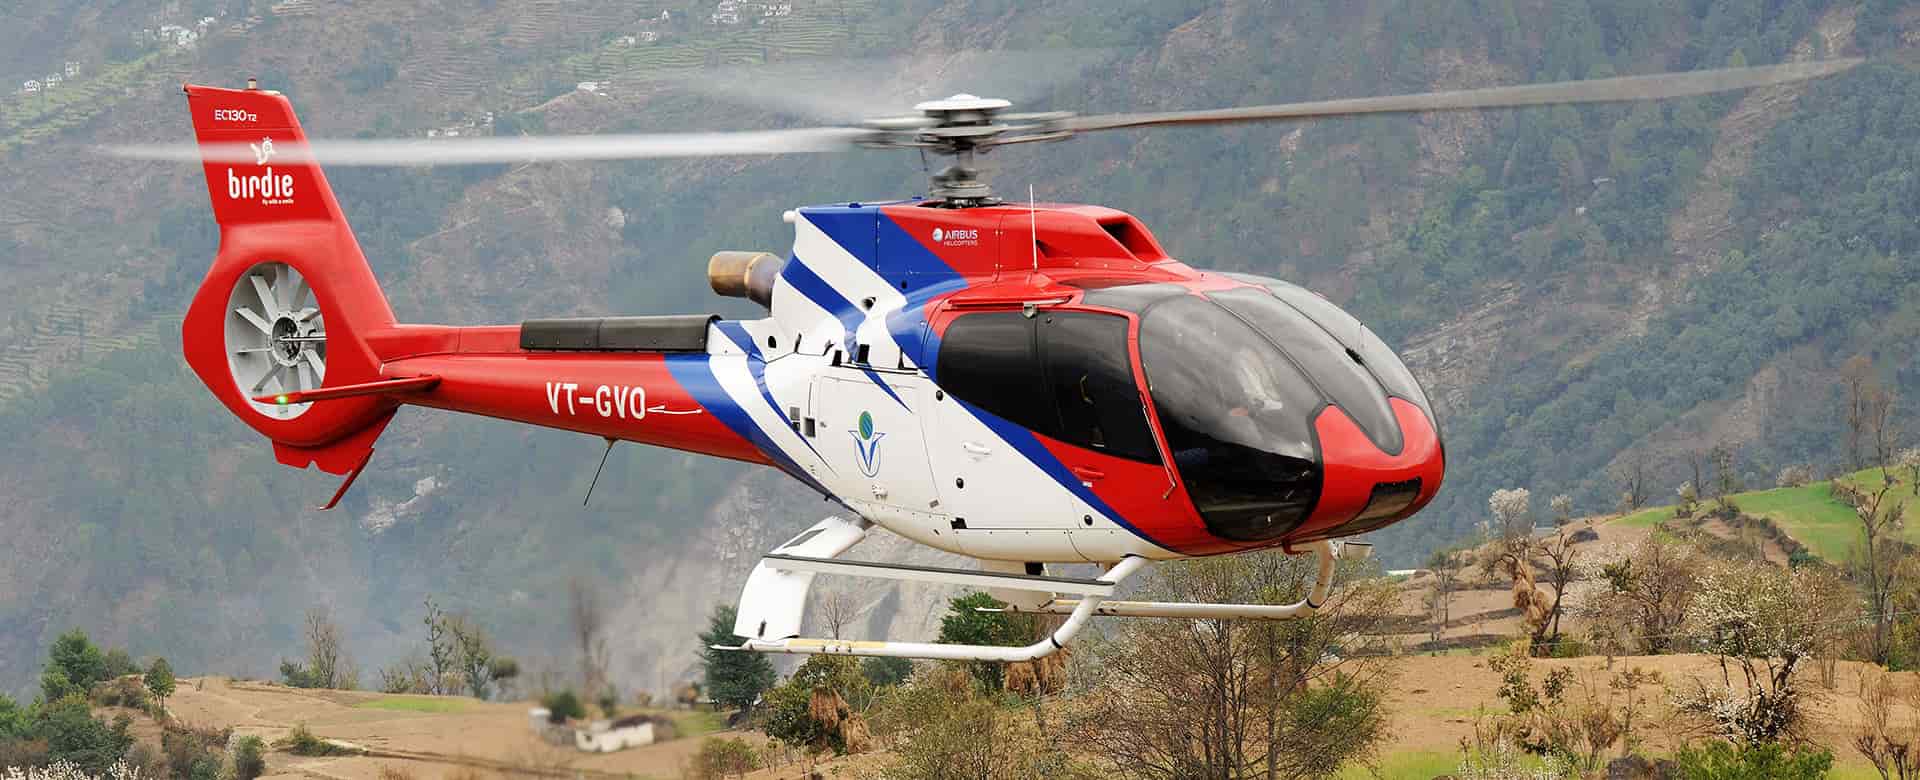 Book chardham temple package by helicopter 2020